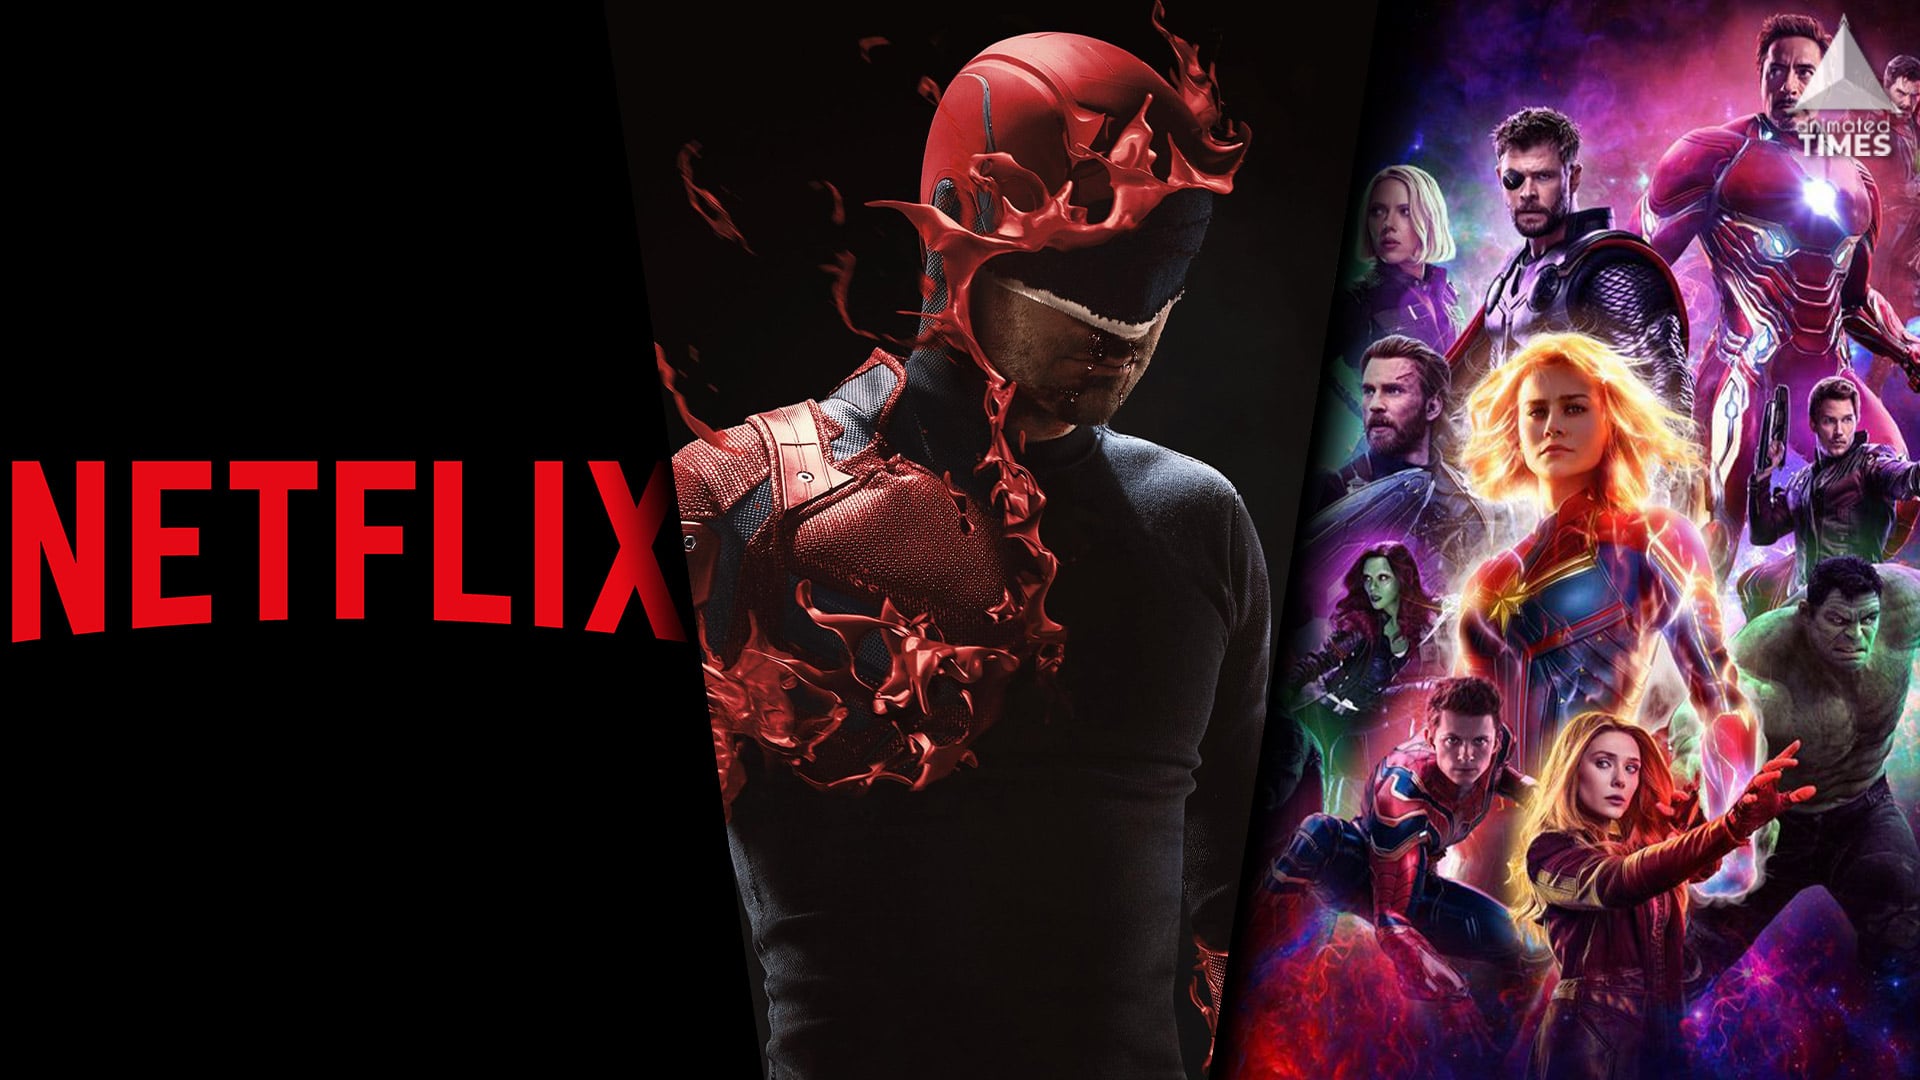 Daredevil: Marvel Has Regained the Rights to Netflix’s Main Defender